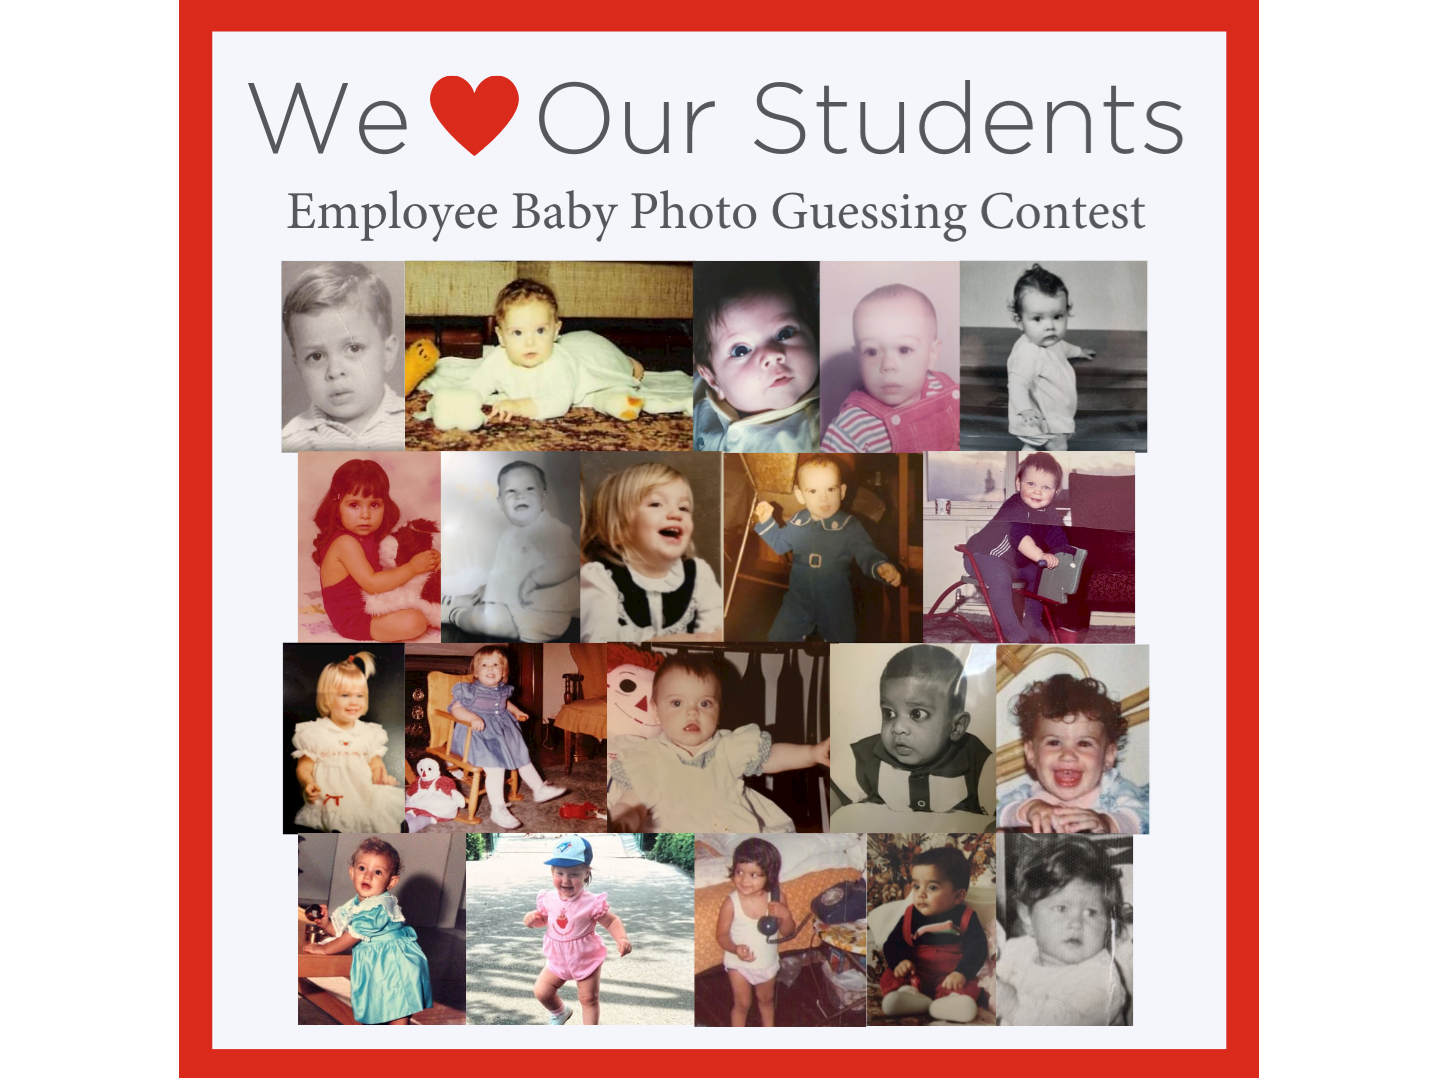 Guess who these employee babies are for a chance to win